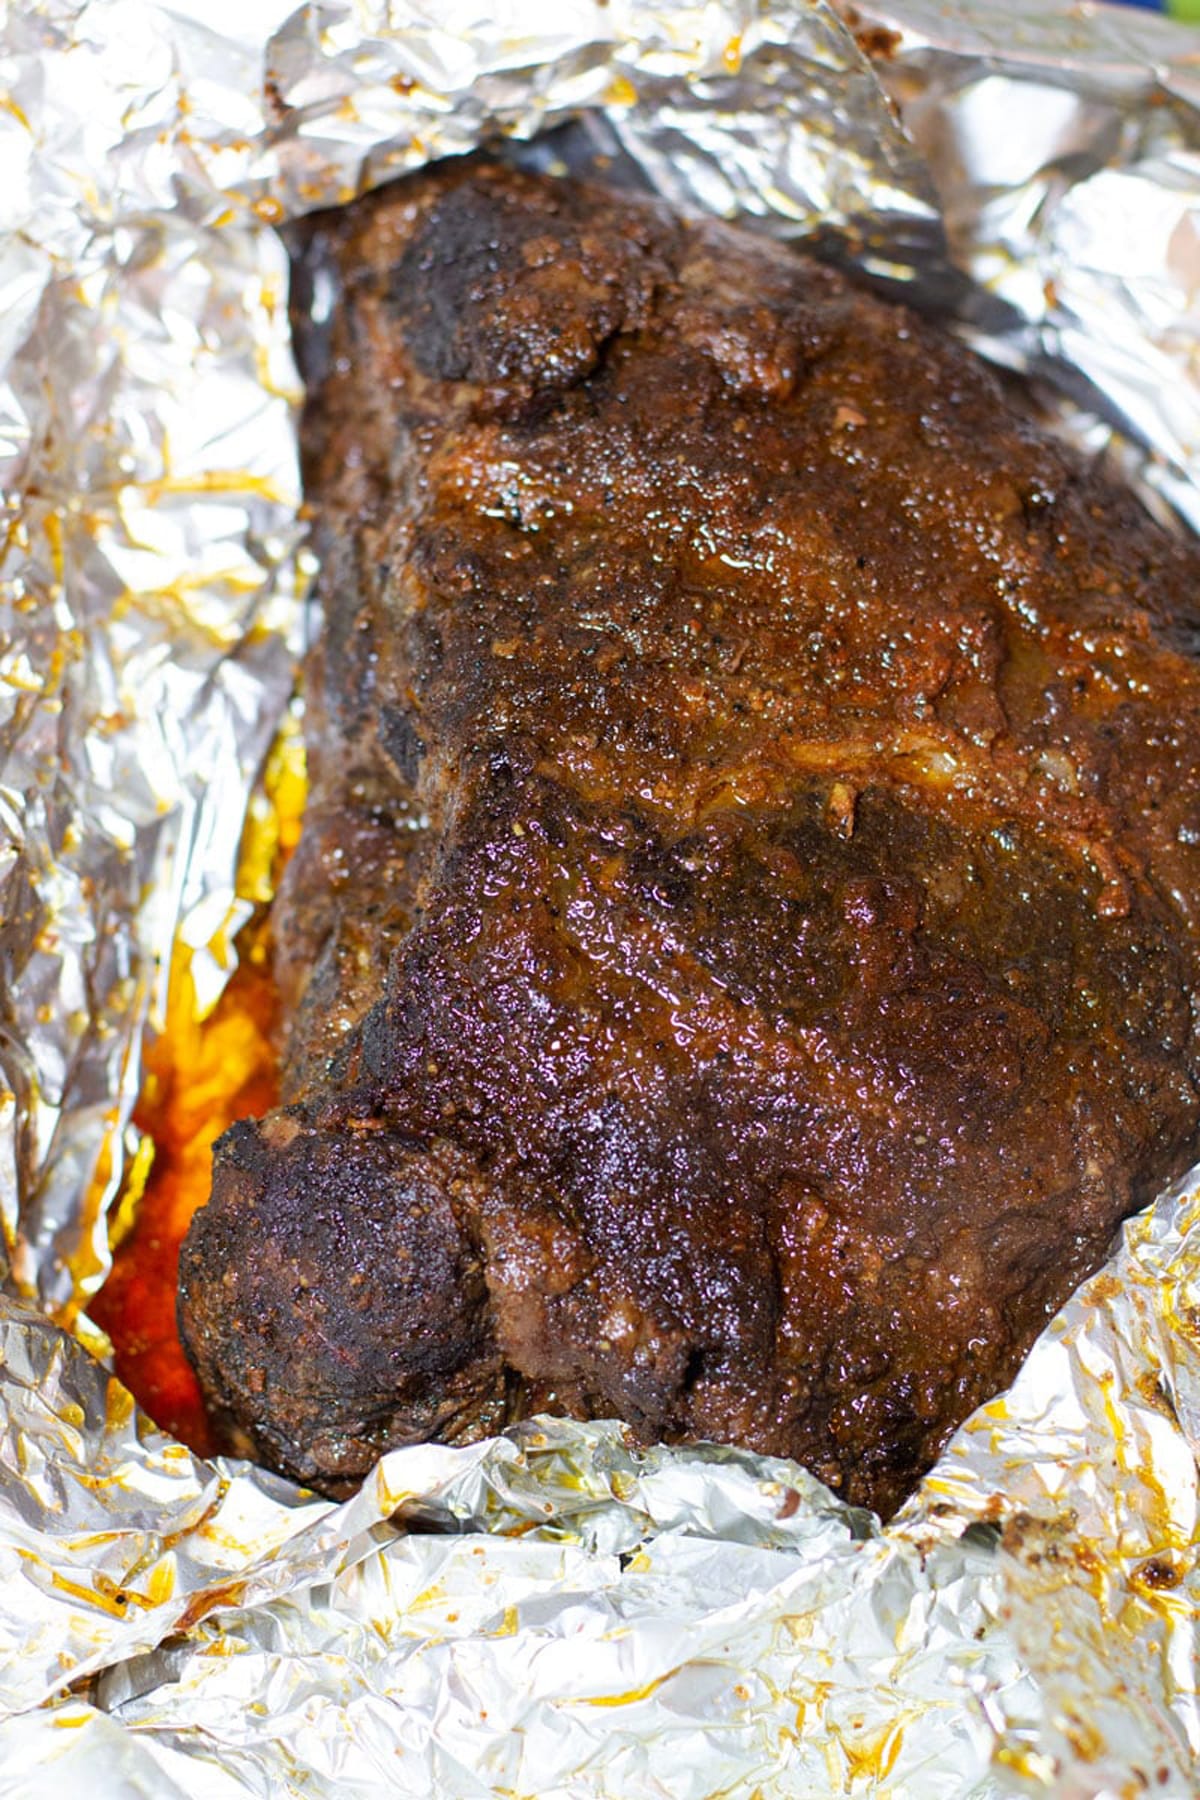 Smoked pork shoulder being unwrapped from an aluminum foil packet.